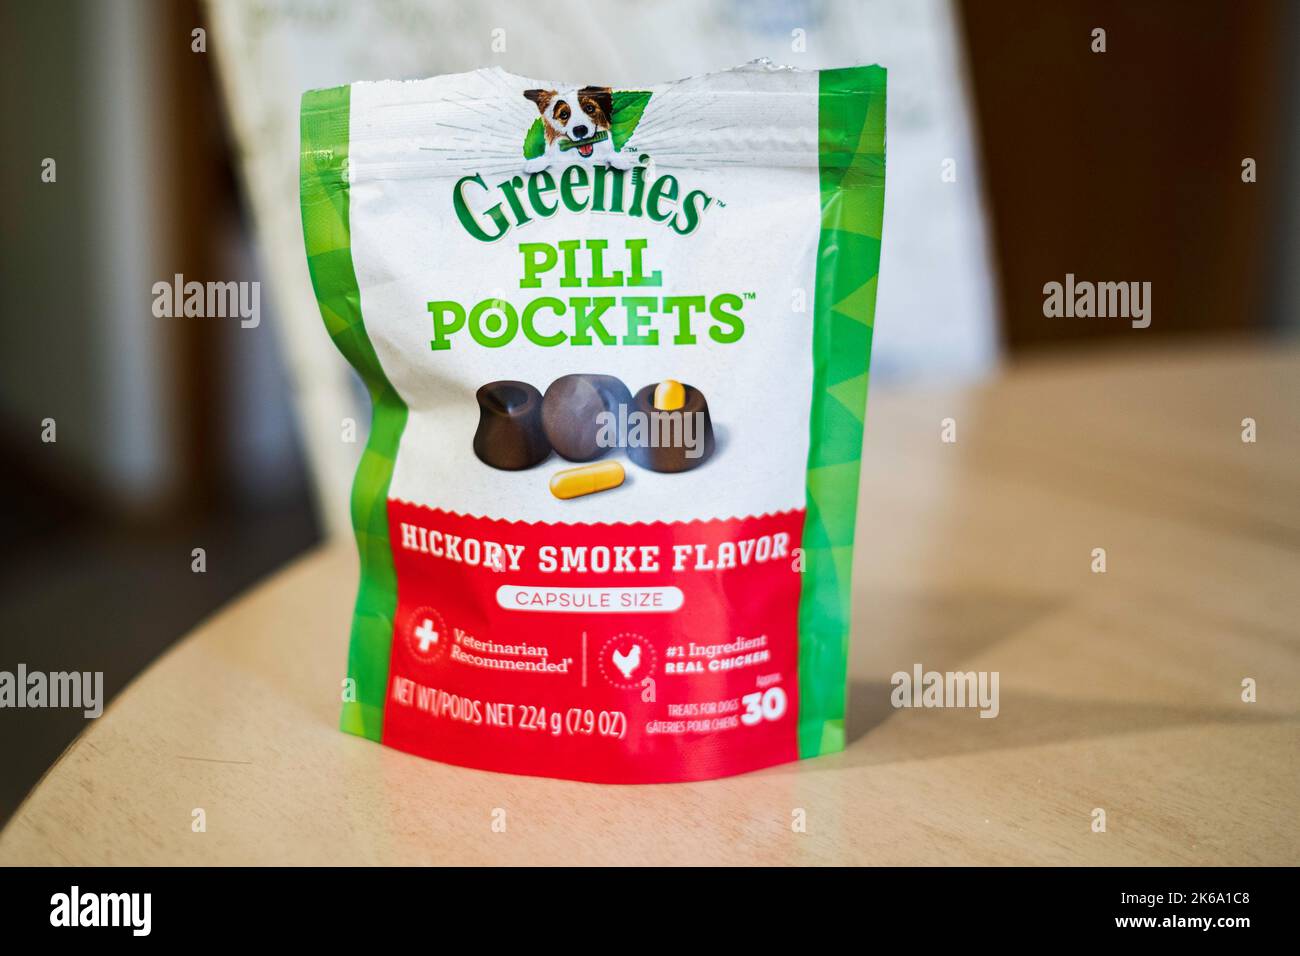 A package of Greenies' Pill Pockets used to hide pills for pets in a delicious flavored pocket of food. USA. Stock Photo